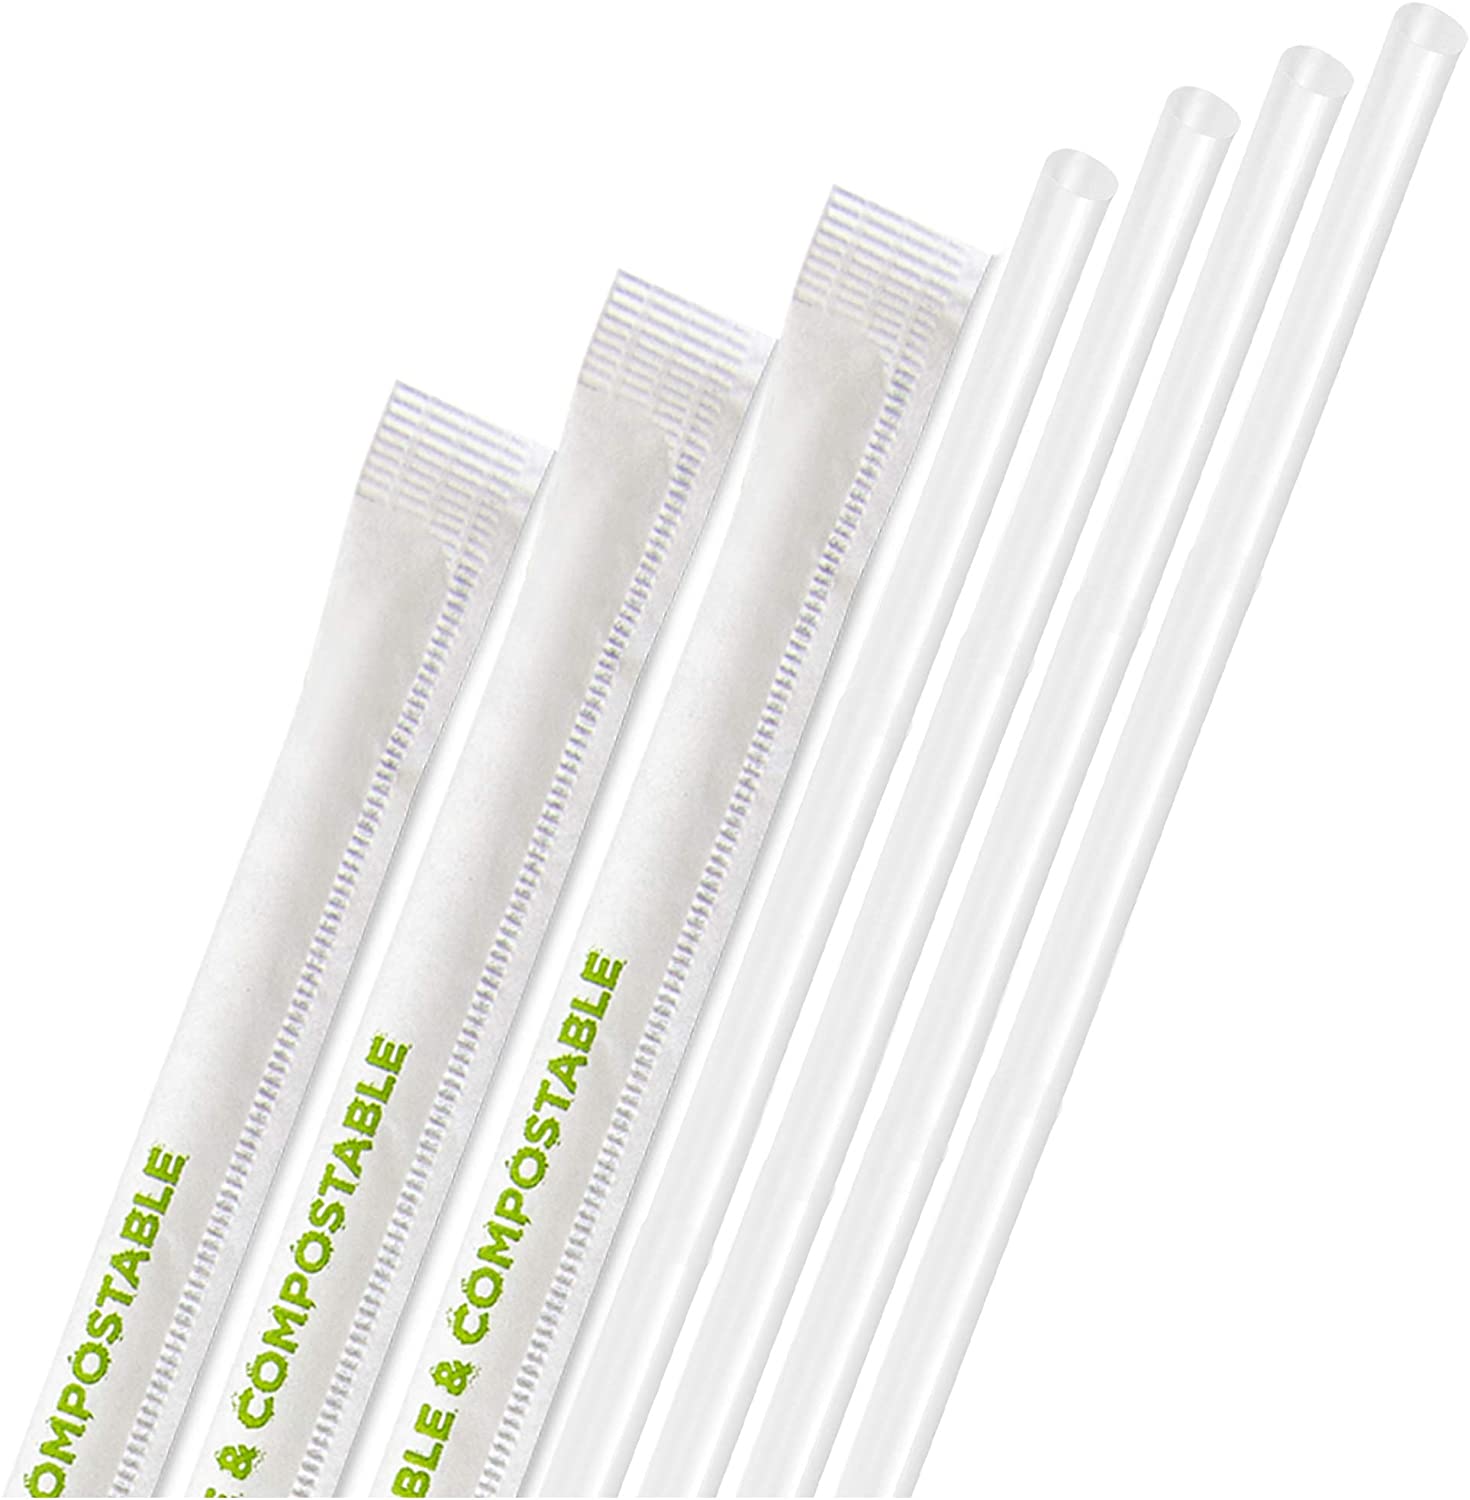 Jumbo Straw 7.75 Paper Wrapped, Clear